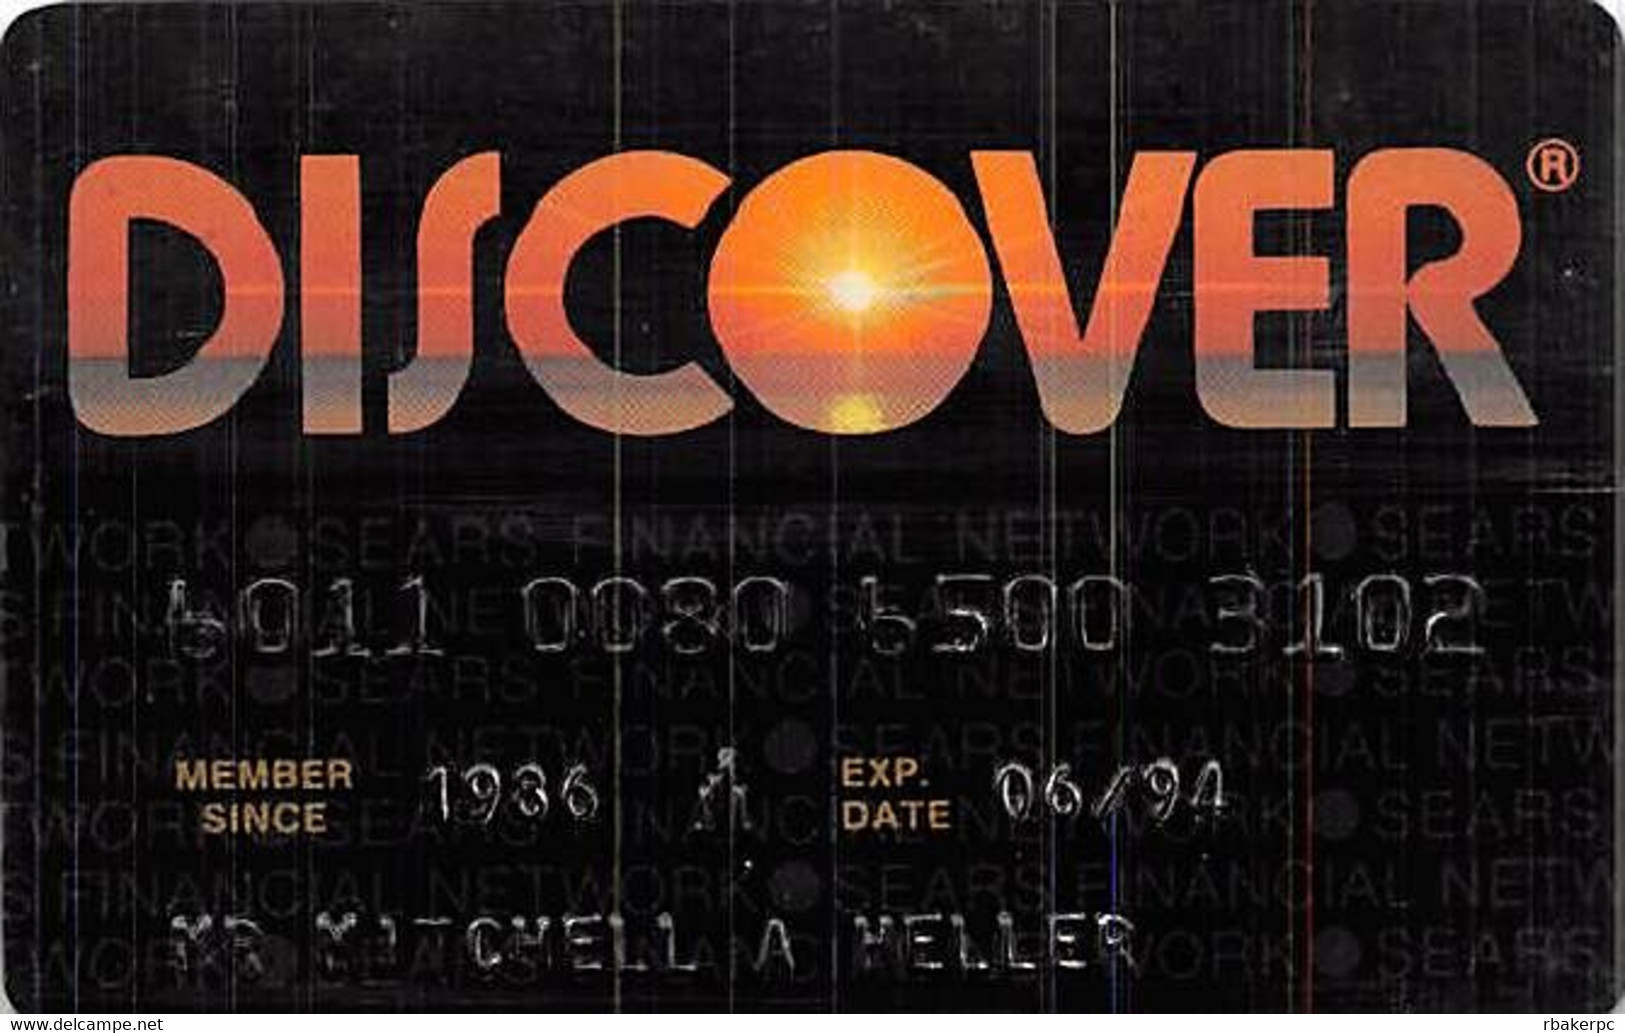 Discover Credit Card Exp 06/94 - Credit Cards (Exp. Date Min. 10 Years)